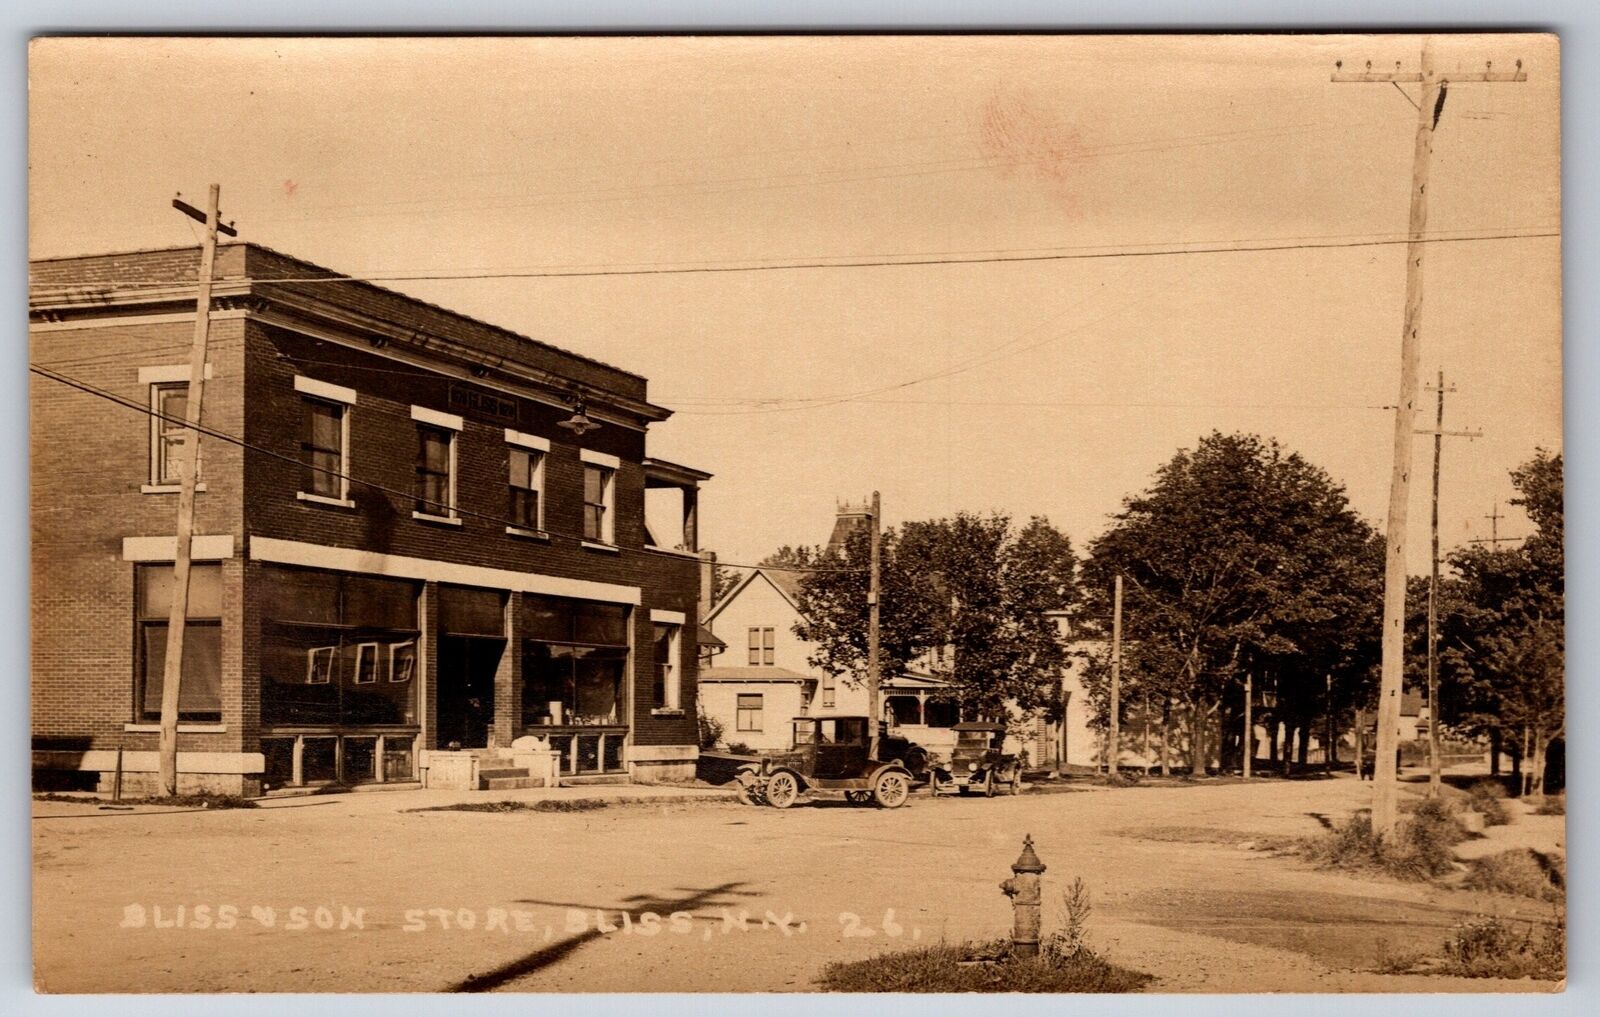 Bliss NY~In Town Of Eagle~Bliss & Son General Store~Vintage Autos~1920 RPPC